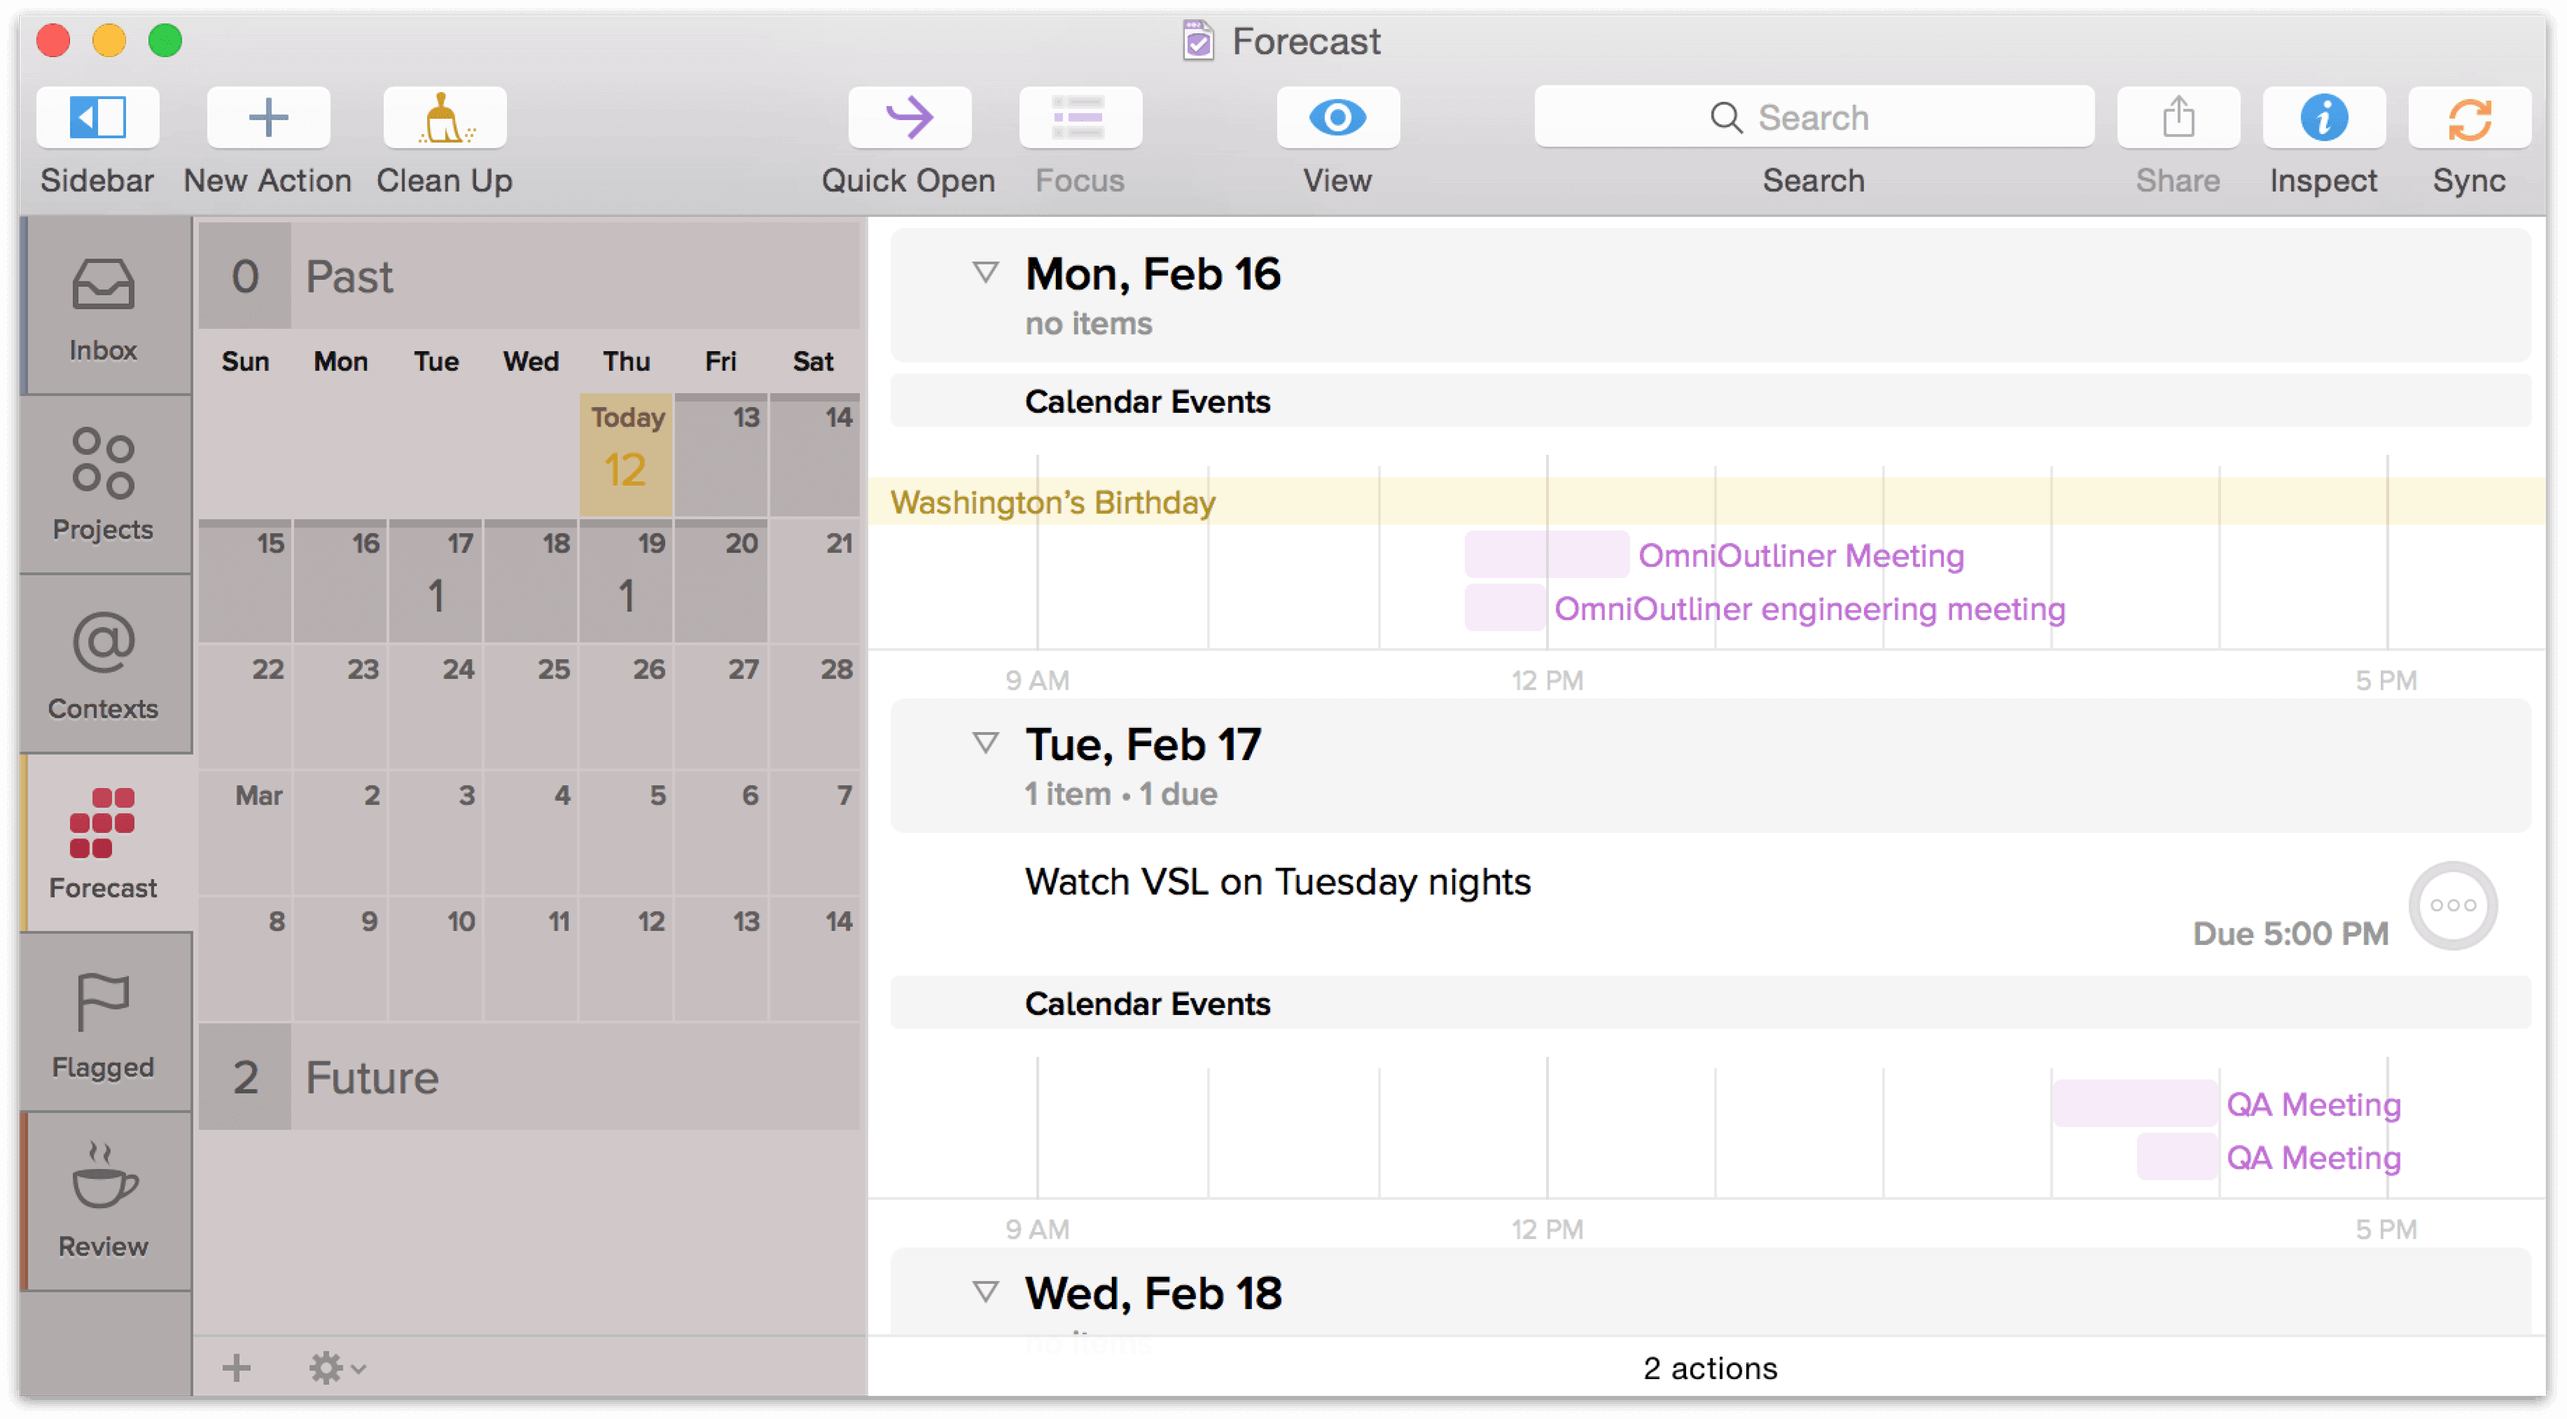 Select a range of dates by clicking and dragging on the calendar in the sidebar